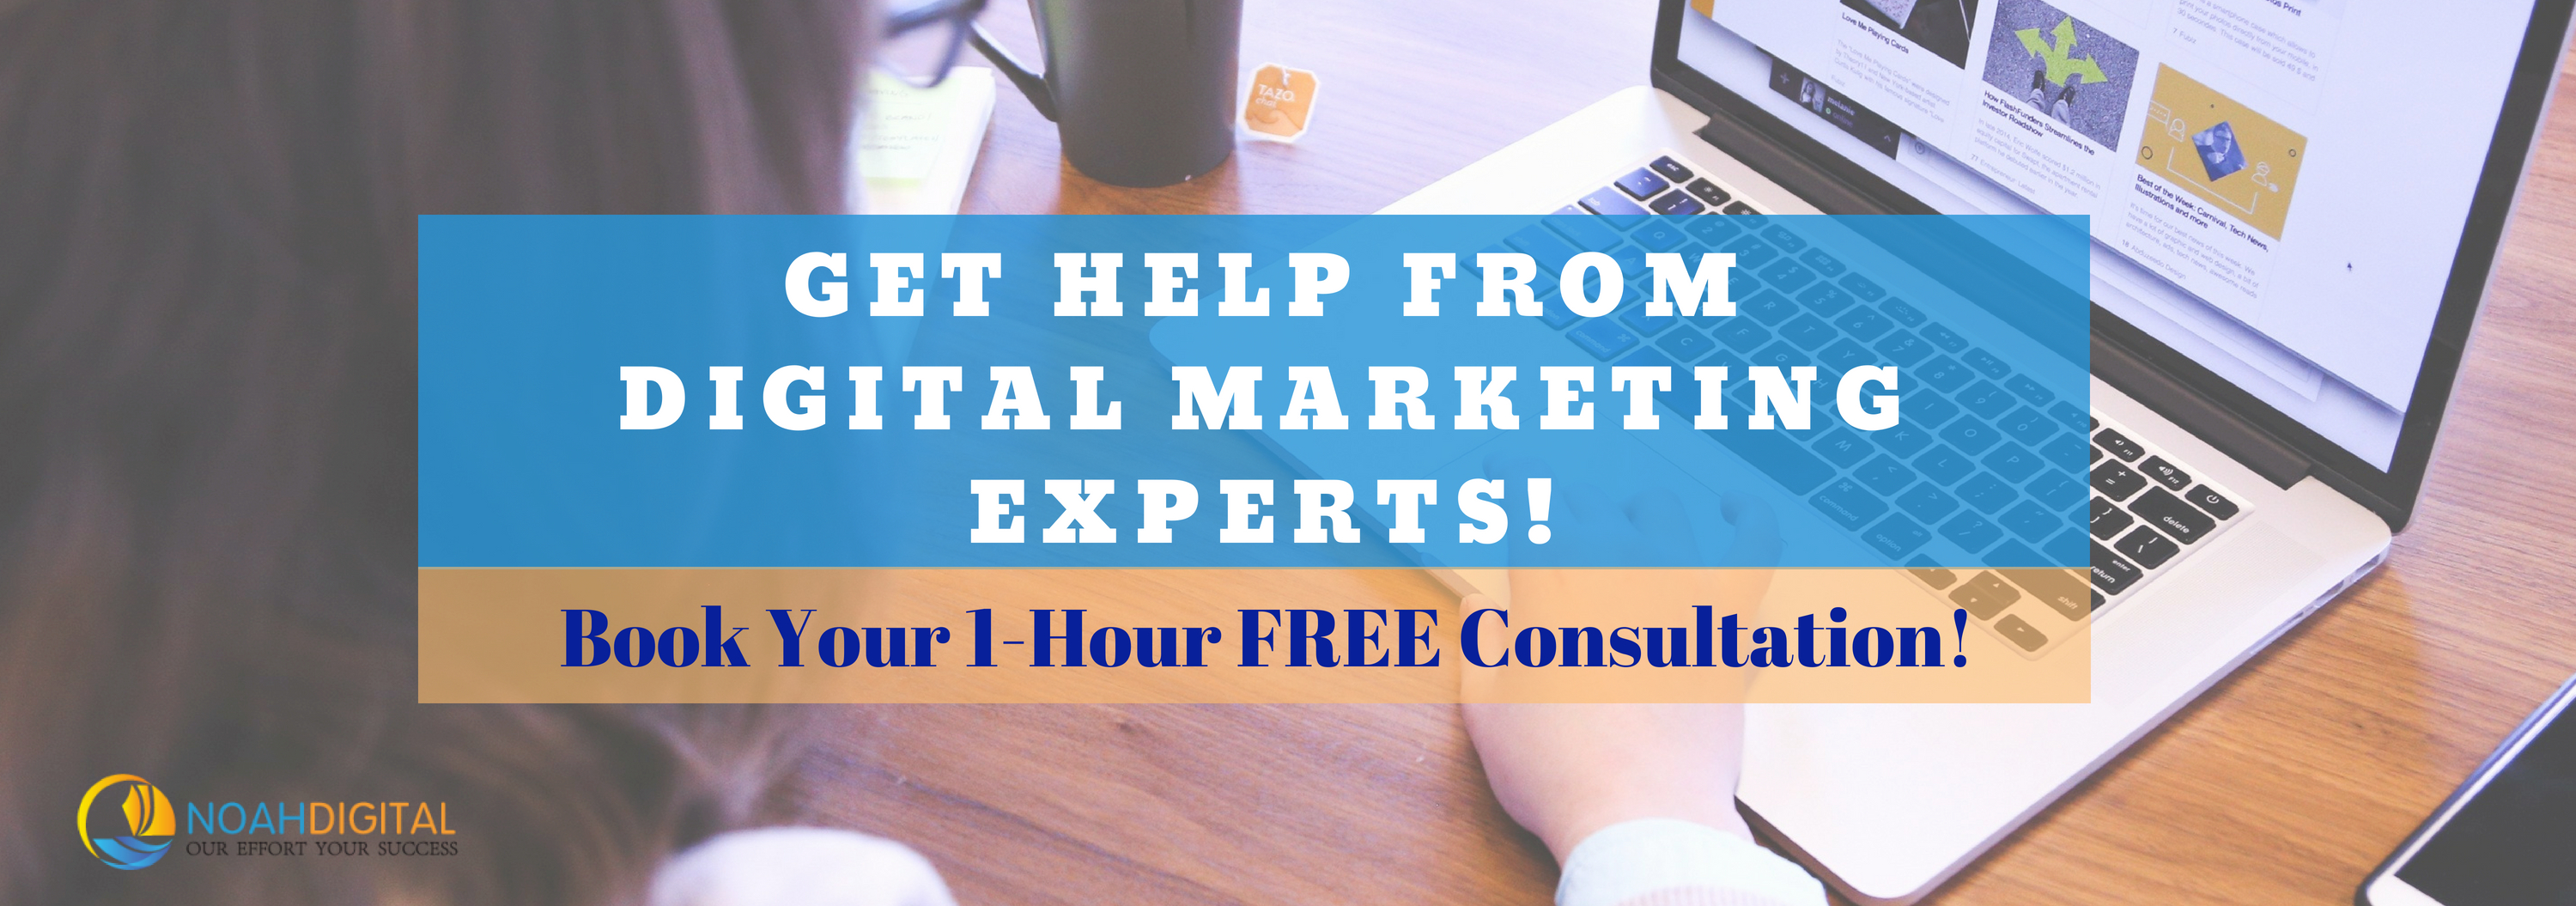 Get Help from digital marketing experts